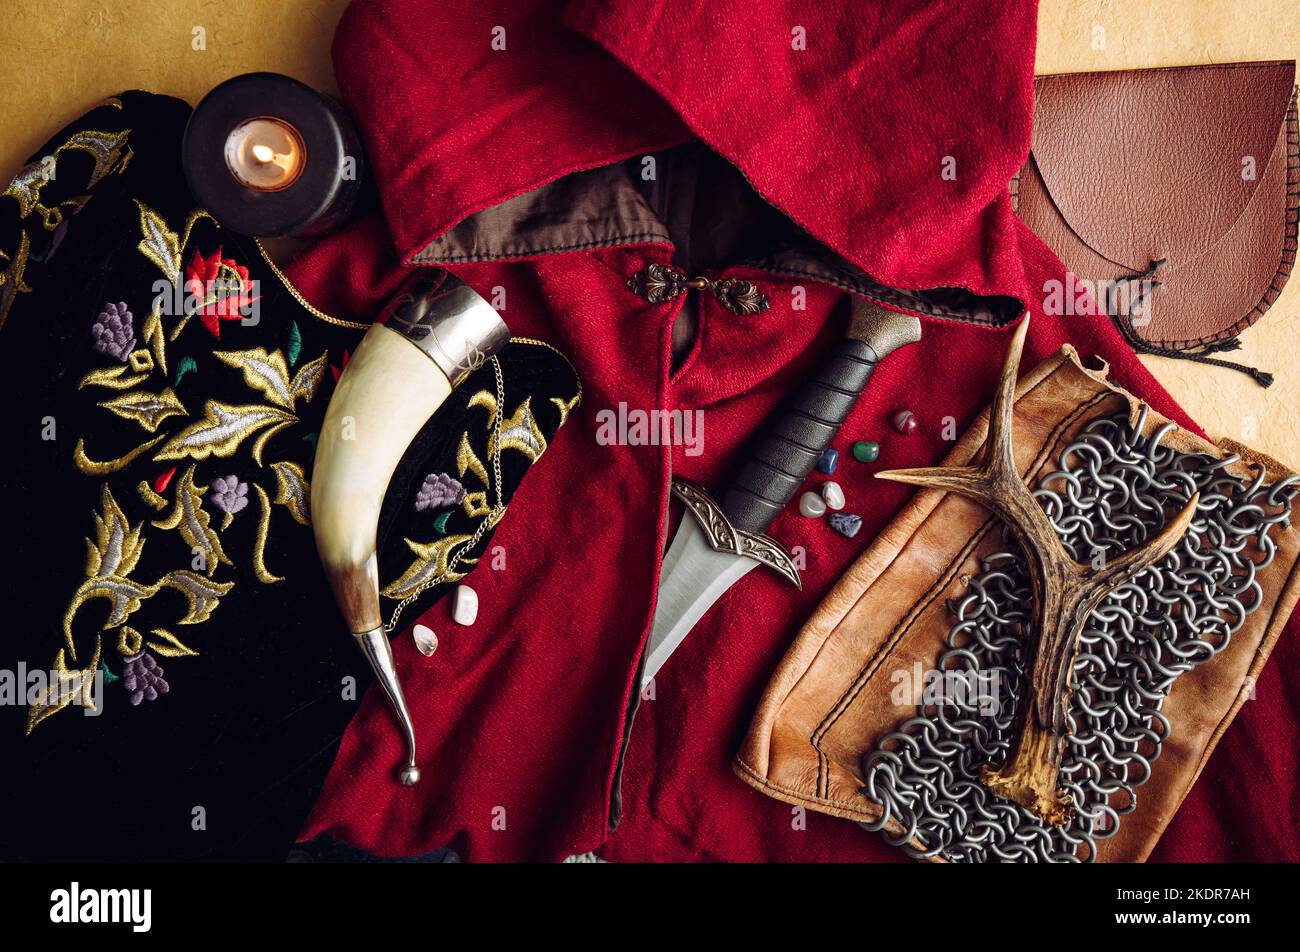 Fantasy live action role play game concept. Background decorated with various character objects tools: Dagger, chain mail, cape, clothing, horn. Stock Photo